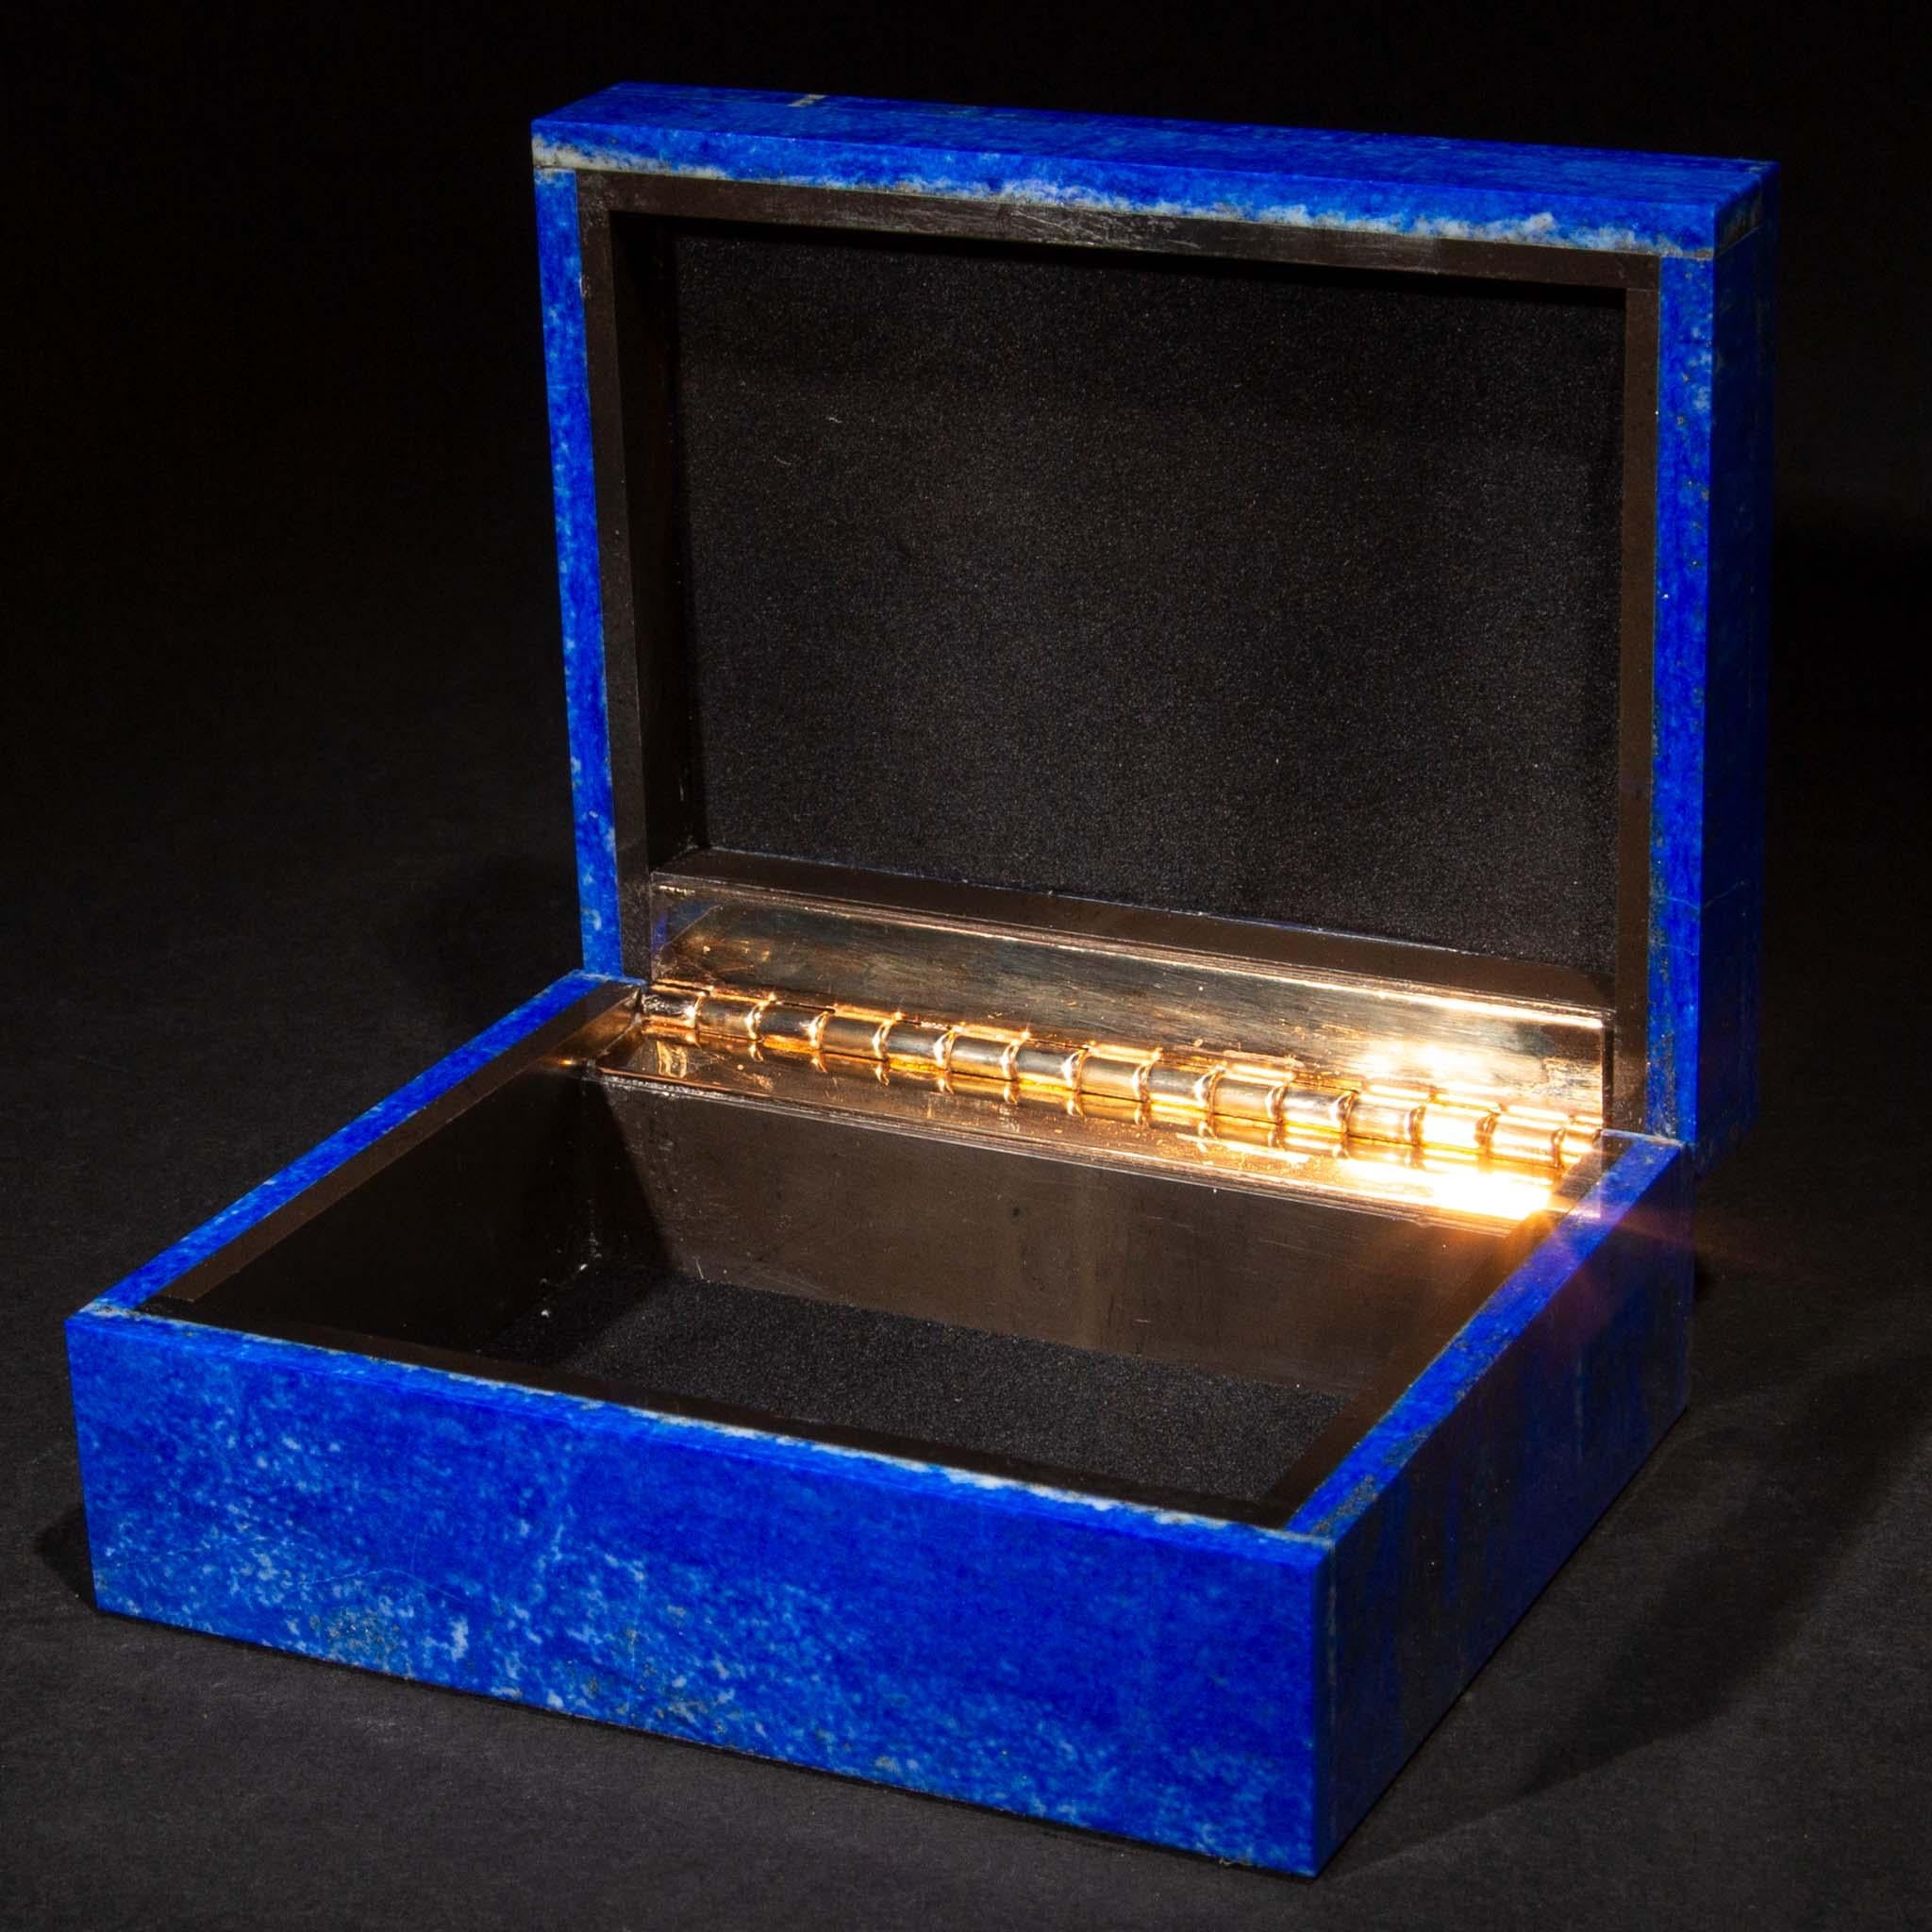 Lapis lazuli hinged boxes. Mined in Afghanistan, they were then cut, polished, and created for us in India. Lapis has been prized since antiquity for its characteristic blue color and gold speckling. It was also the most expensive pigment in a